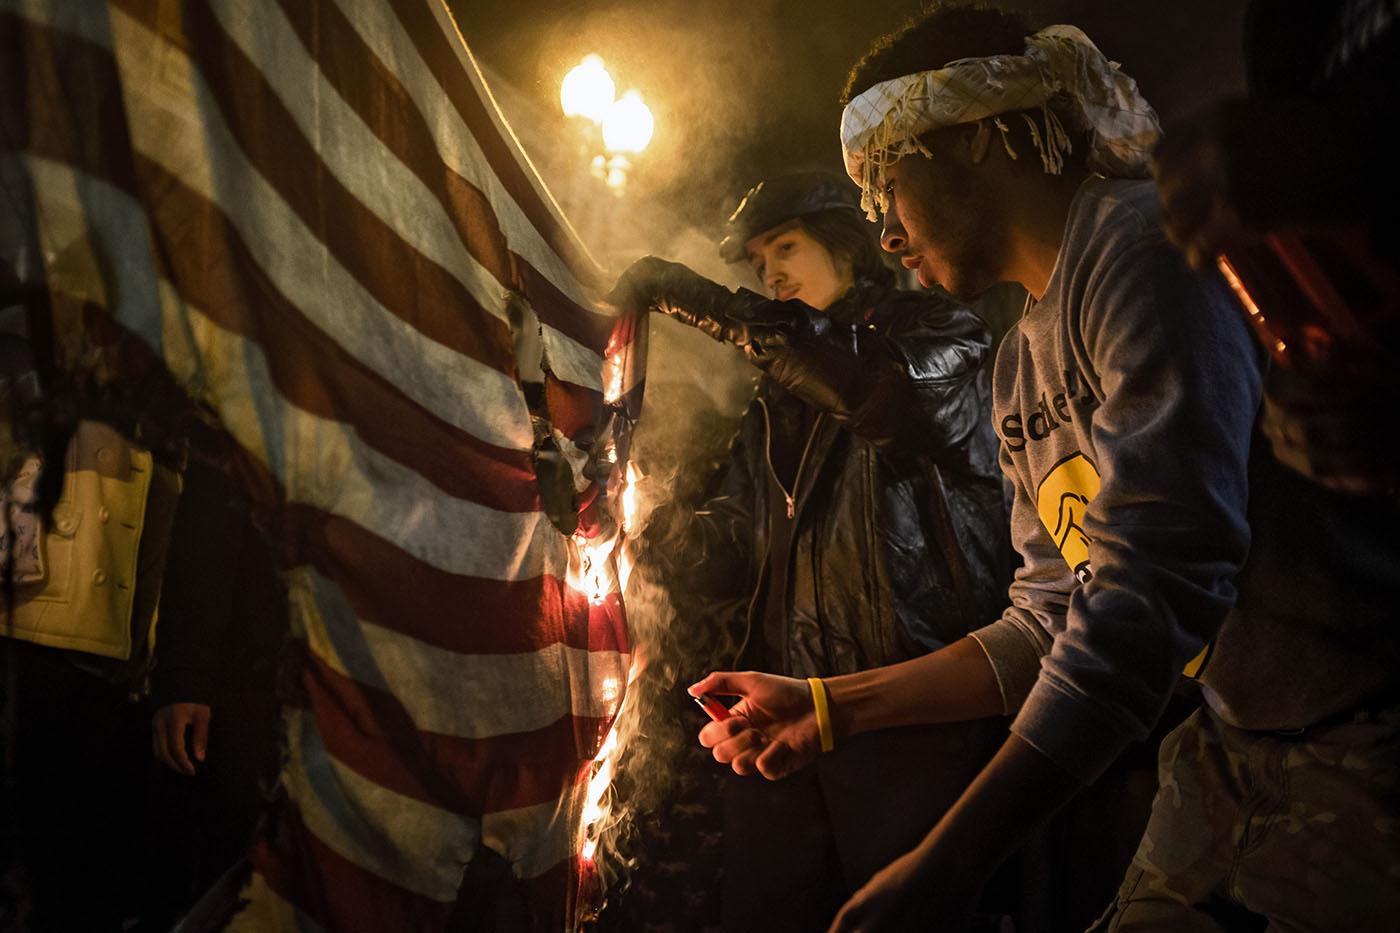 Protesters burn a US flag as they march through downtown Washington, DC following a Missouri grand jury's decision not to indict Officer Darren Wilson in Washington